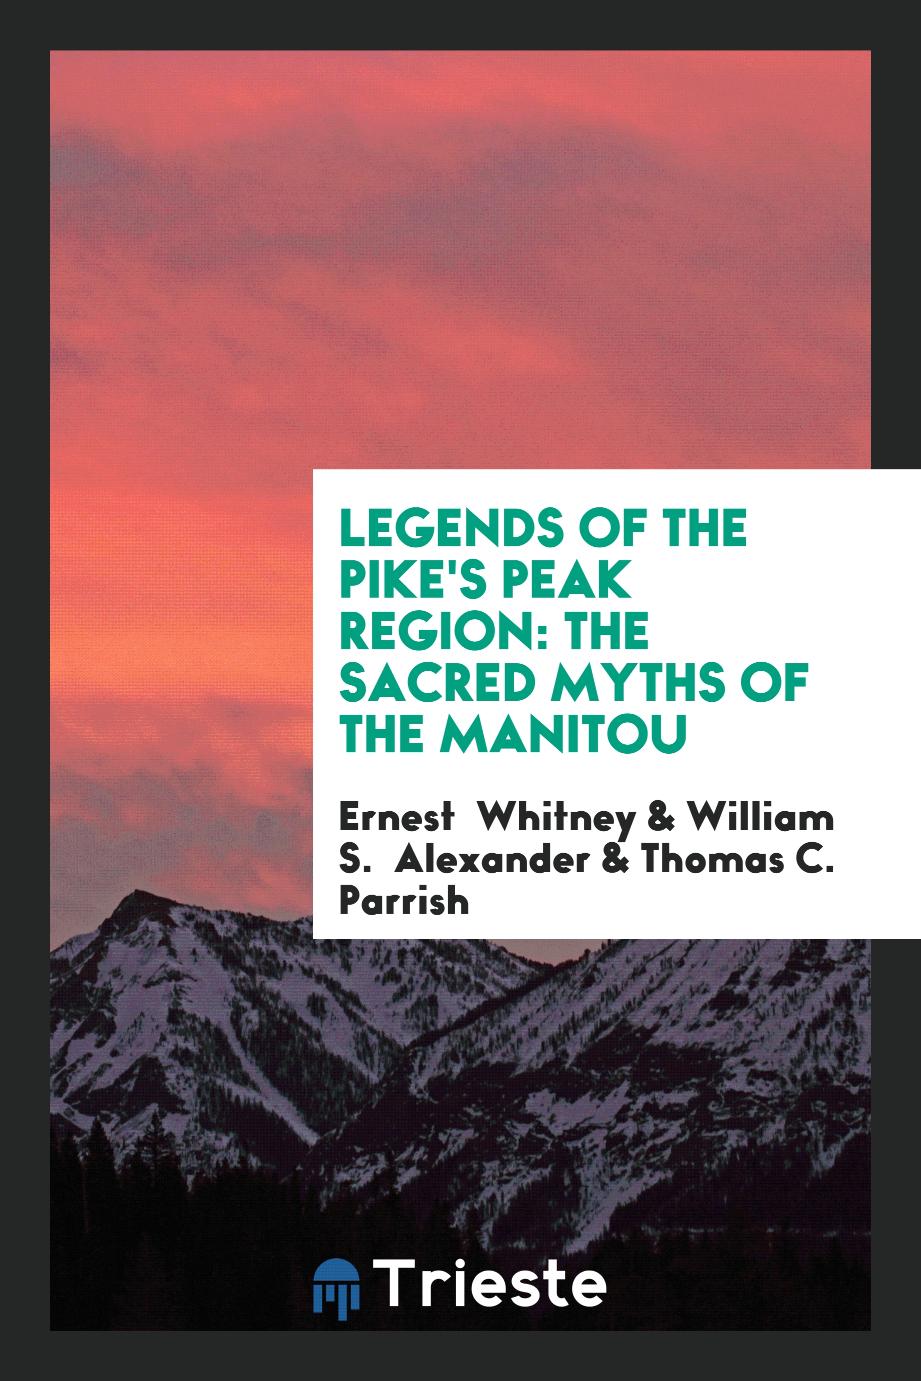 Legends of the Pike's Peak Region: The Sacred Myths of the Manitou